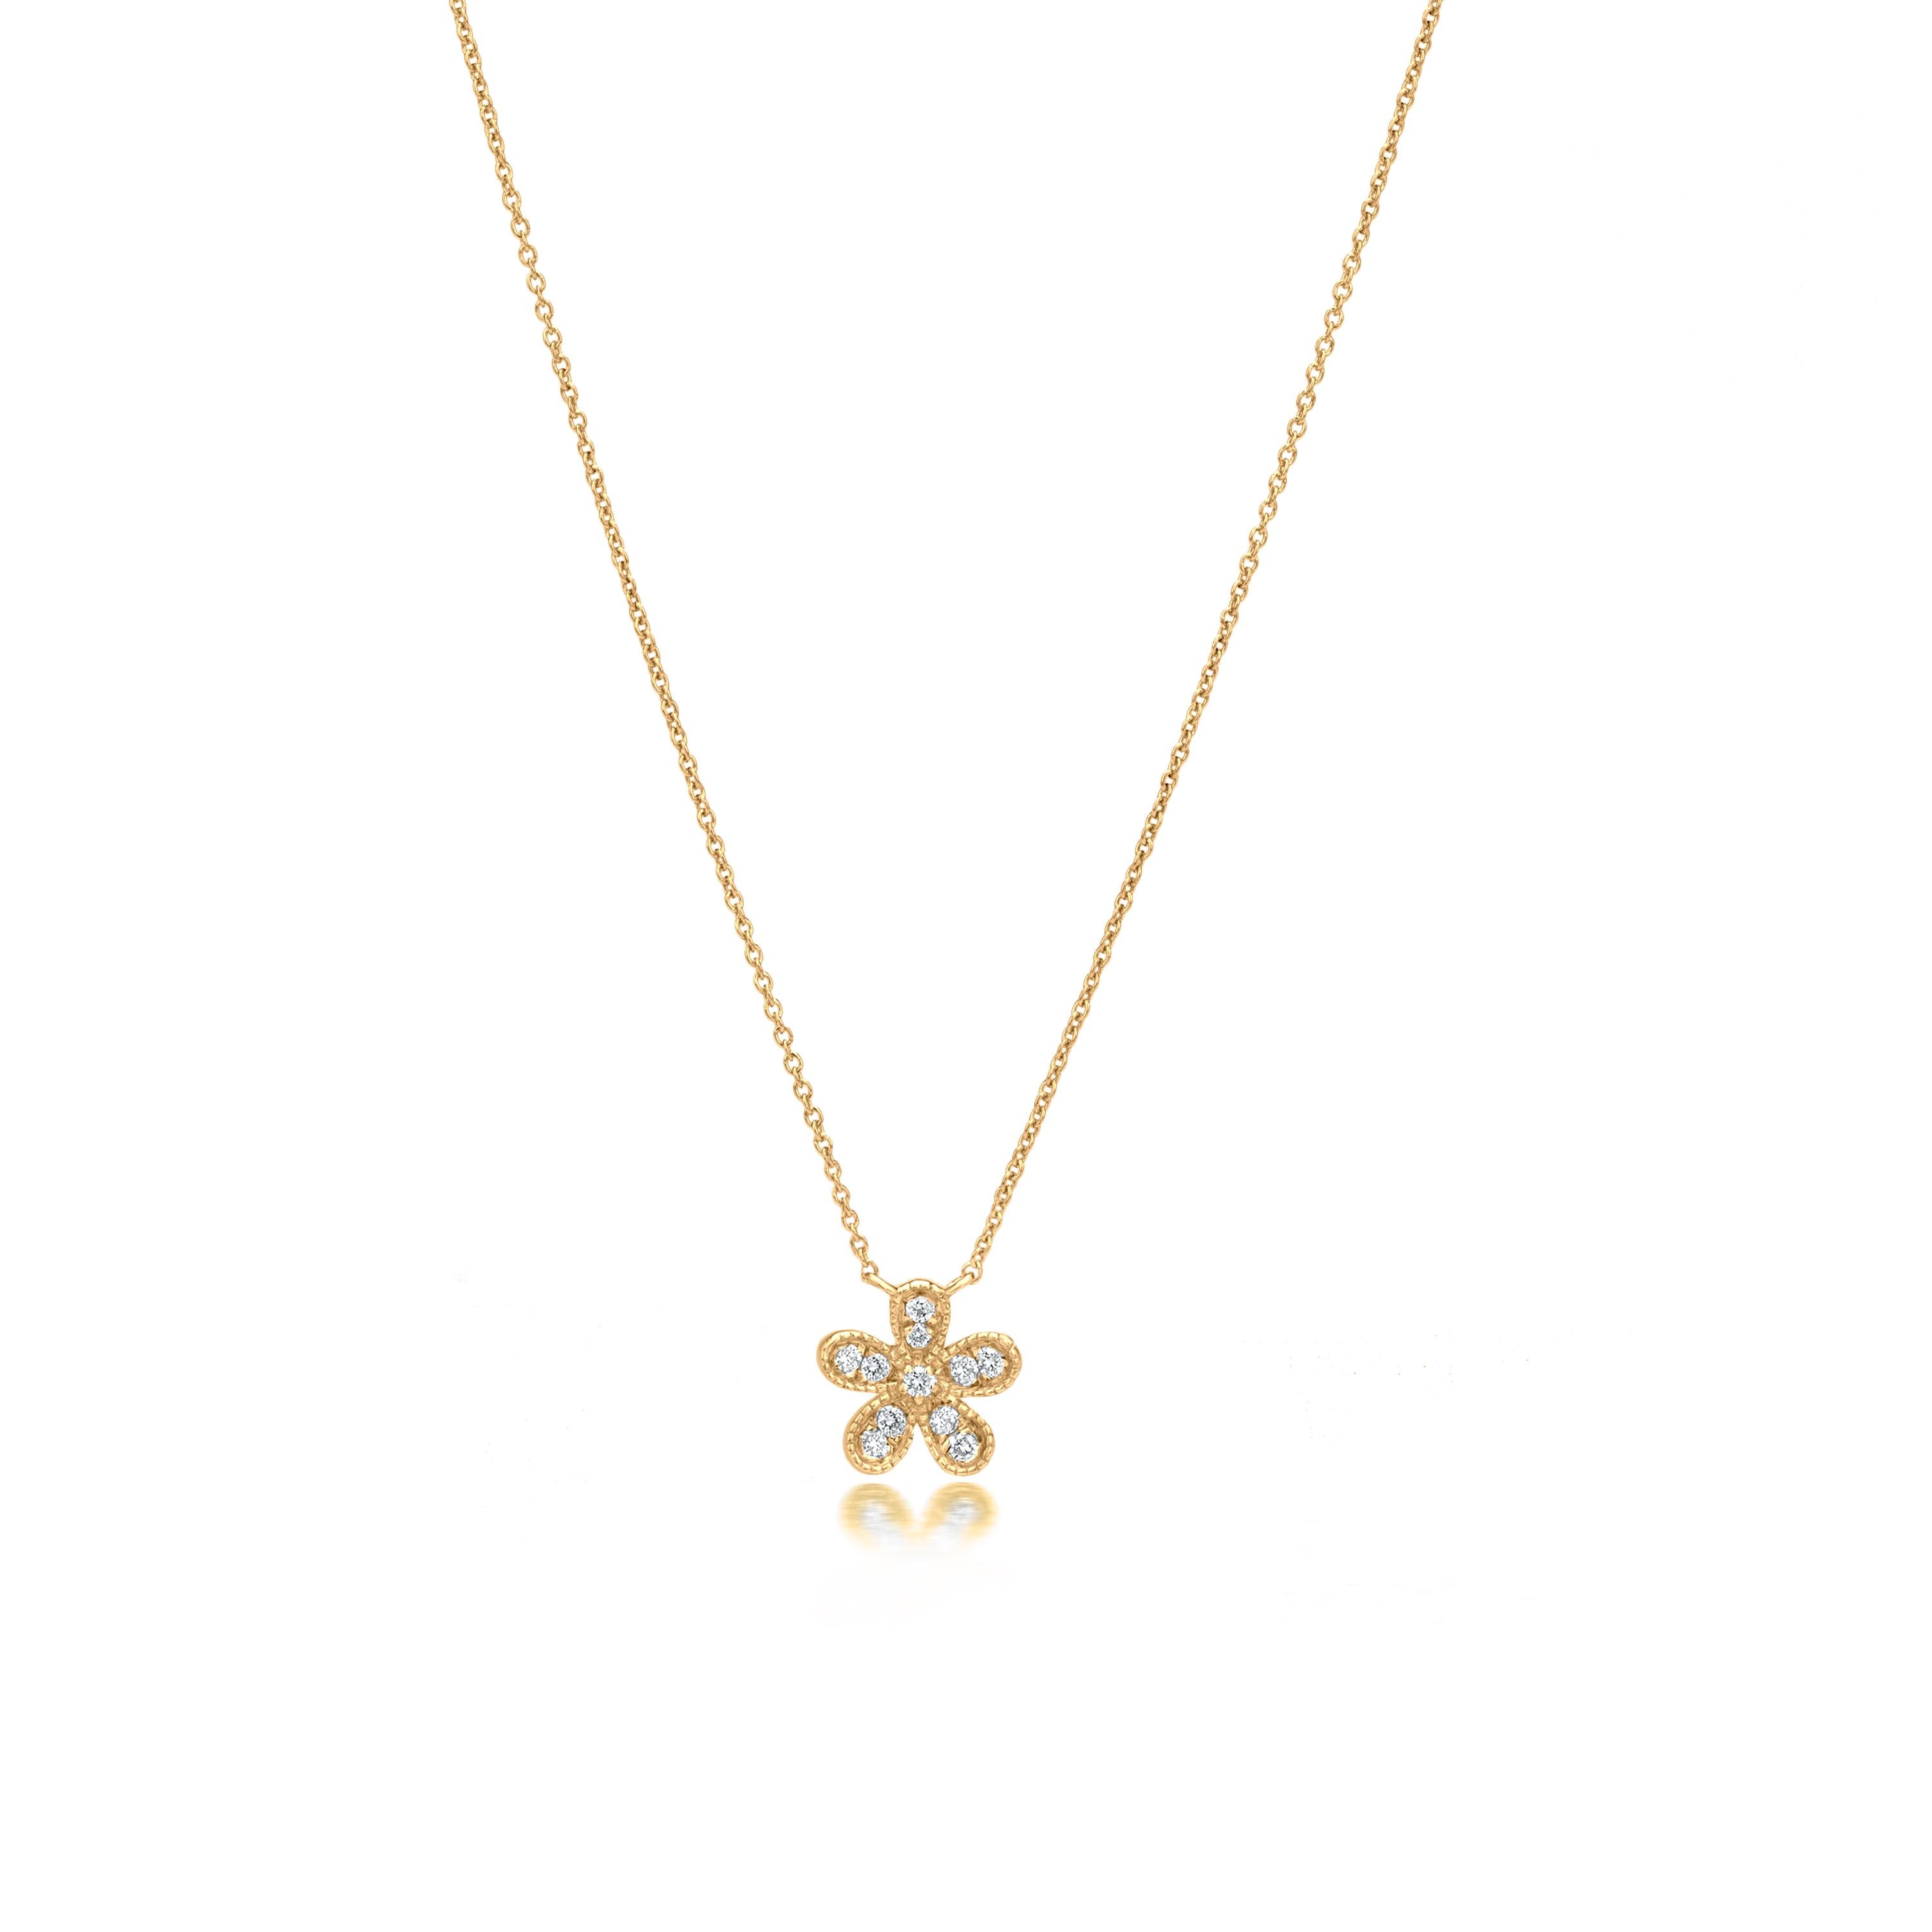 Grace your neckline with a blooming Luxle flower pendant is a symbol of hard-won success. Subtle yet pretty this flower pendant necklace is the new fashion statement. It is featured with 11 round cut diamonds, totaling 0.09Cts adorned in an adorable